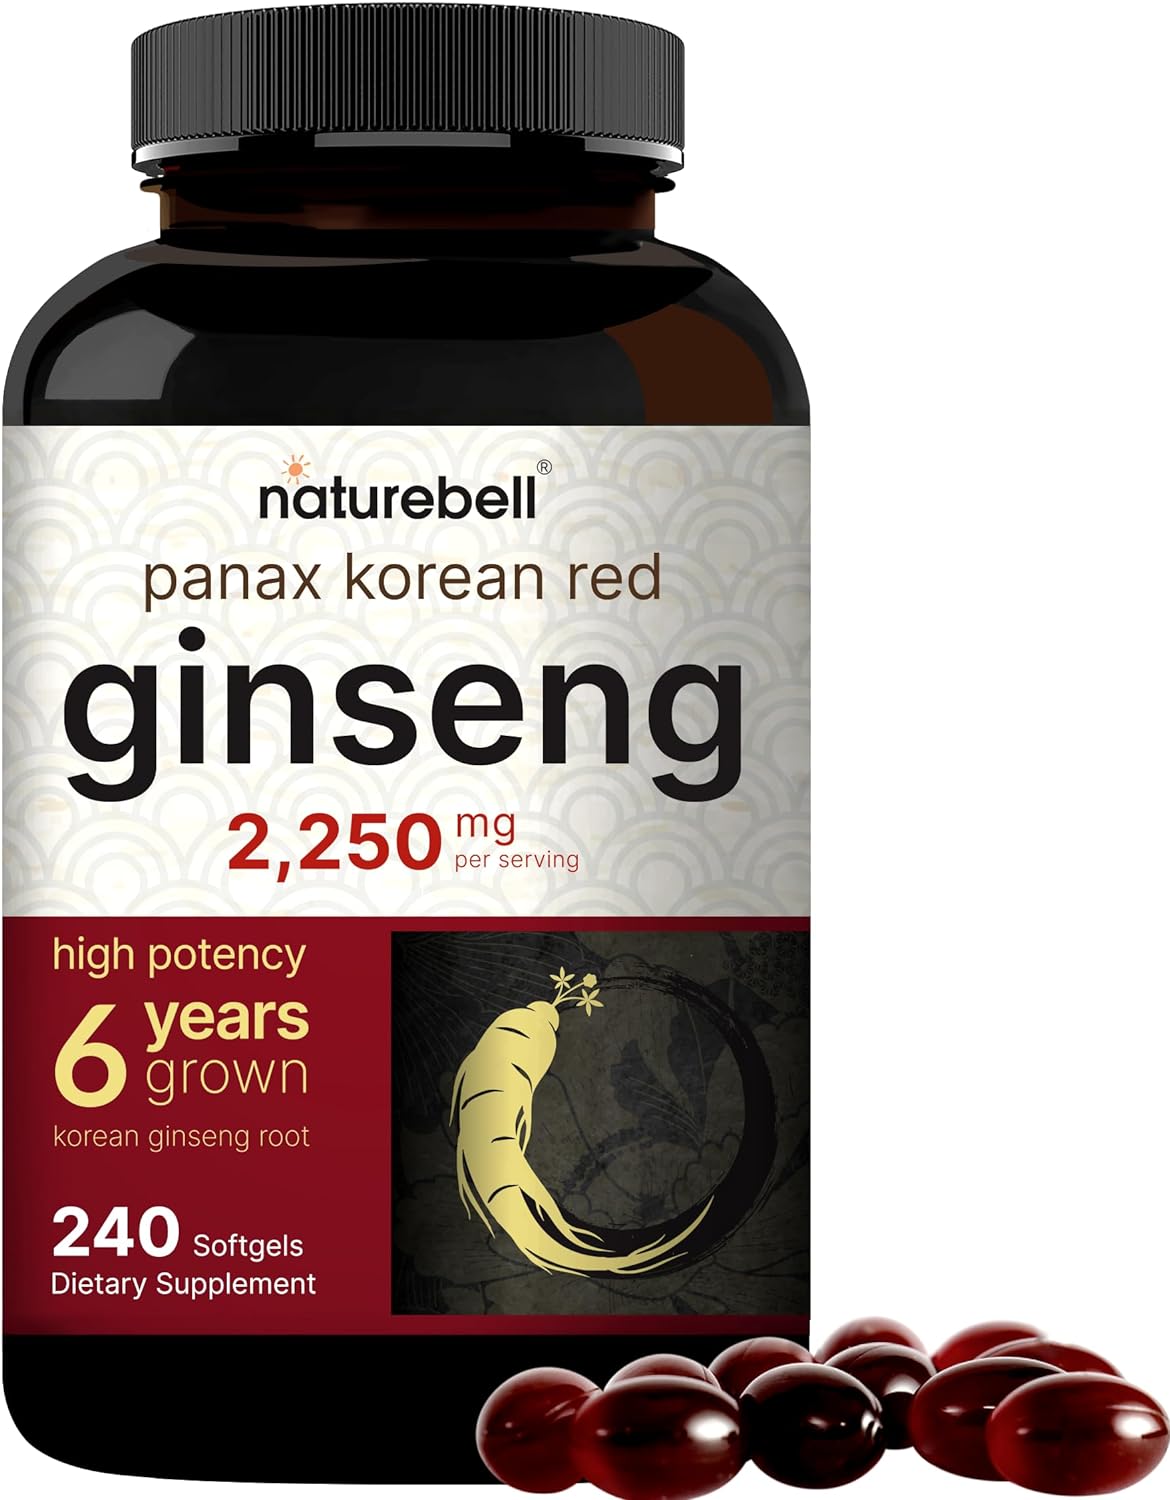 Korean Red Ginseng 2,250mg Per Serving, 240 Softgels | Panax Ginseng Root, Standardized to 10% Ginse